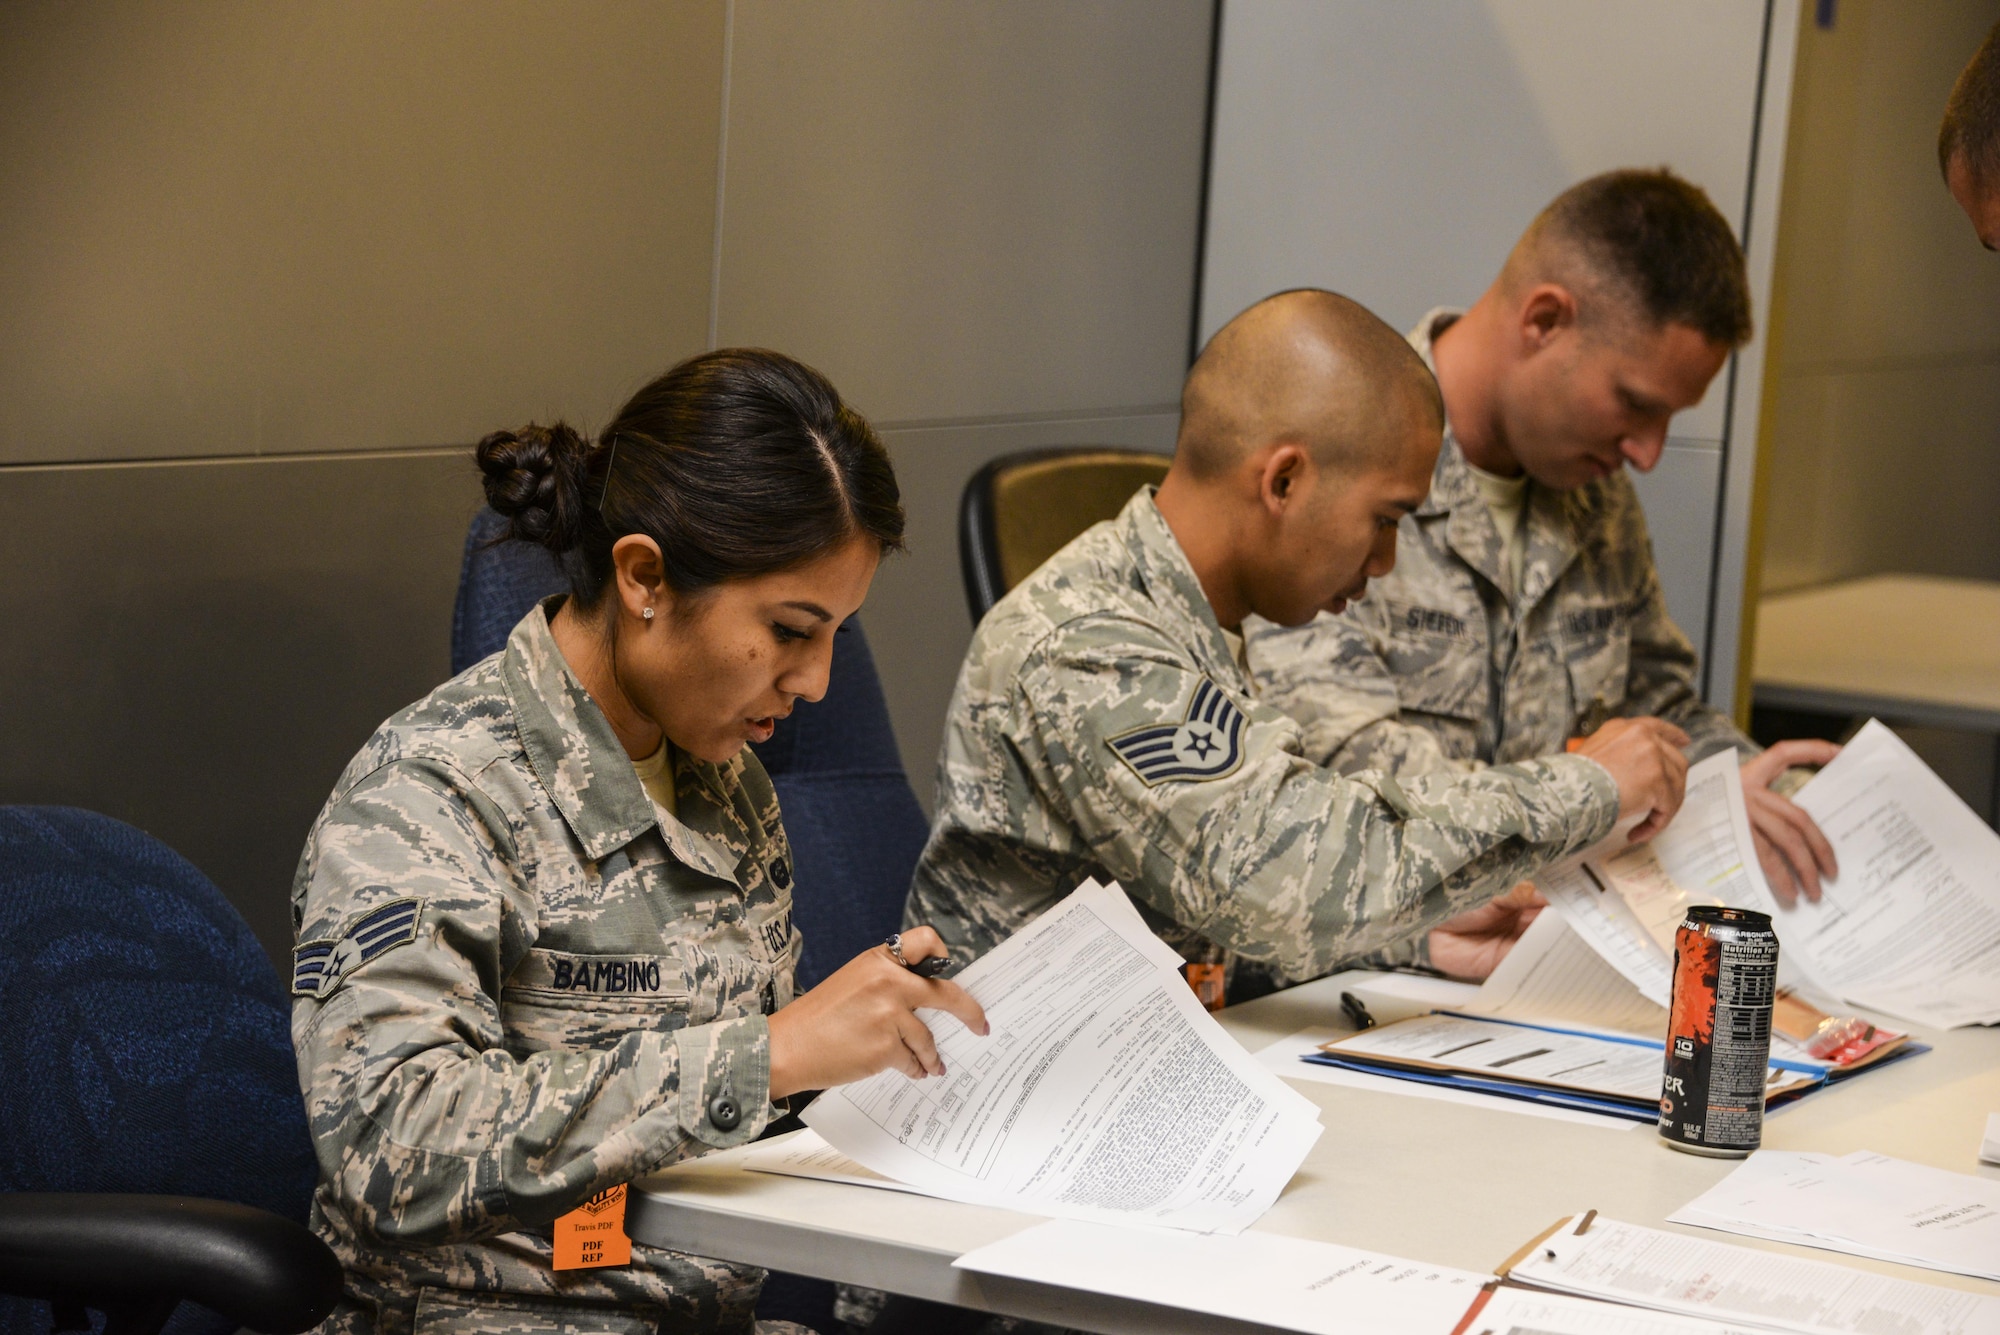 Senior Airman Samantha Bambino, 60th Force Support Squadron outbound assignments and career development technician and PDF representative, checks eligibility paperwork for Airmen from the 621st Contingency Response Wing at Travis Air Force Base, Calif., during a personnel deployment function line July 31, 2017. Teams from the 60th Air Mobility Wing and 621st CRW combined their efforts to support the deployment of more than 130 621st CRW Airmen in support of Exercise Mobility Guardian. (U.S. Air Force photo / 2nd Lt. Sarah Johnson)